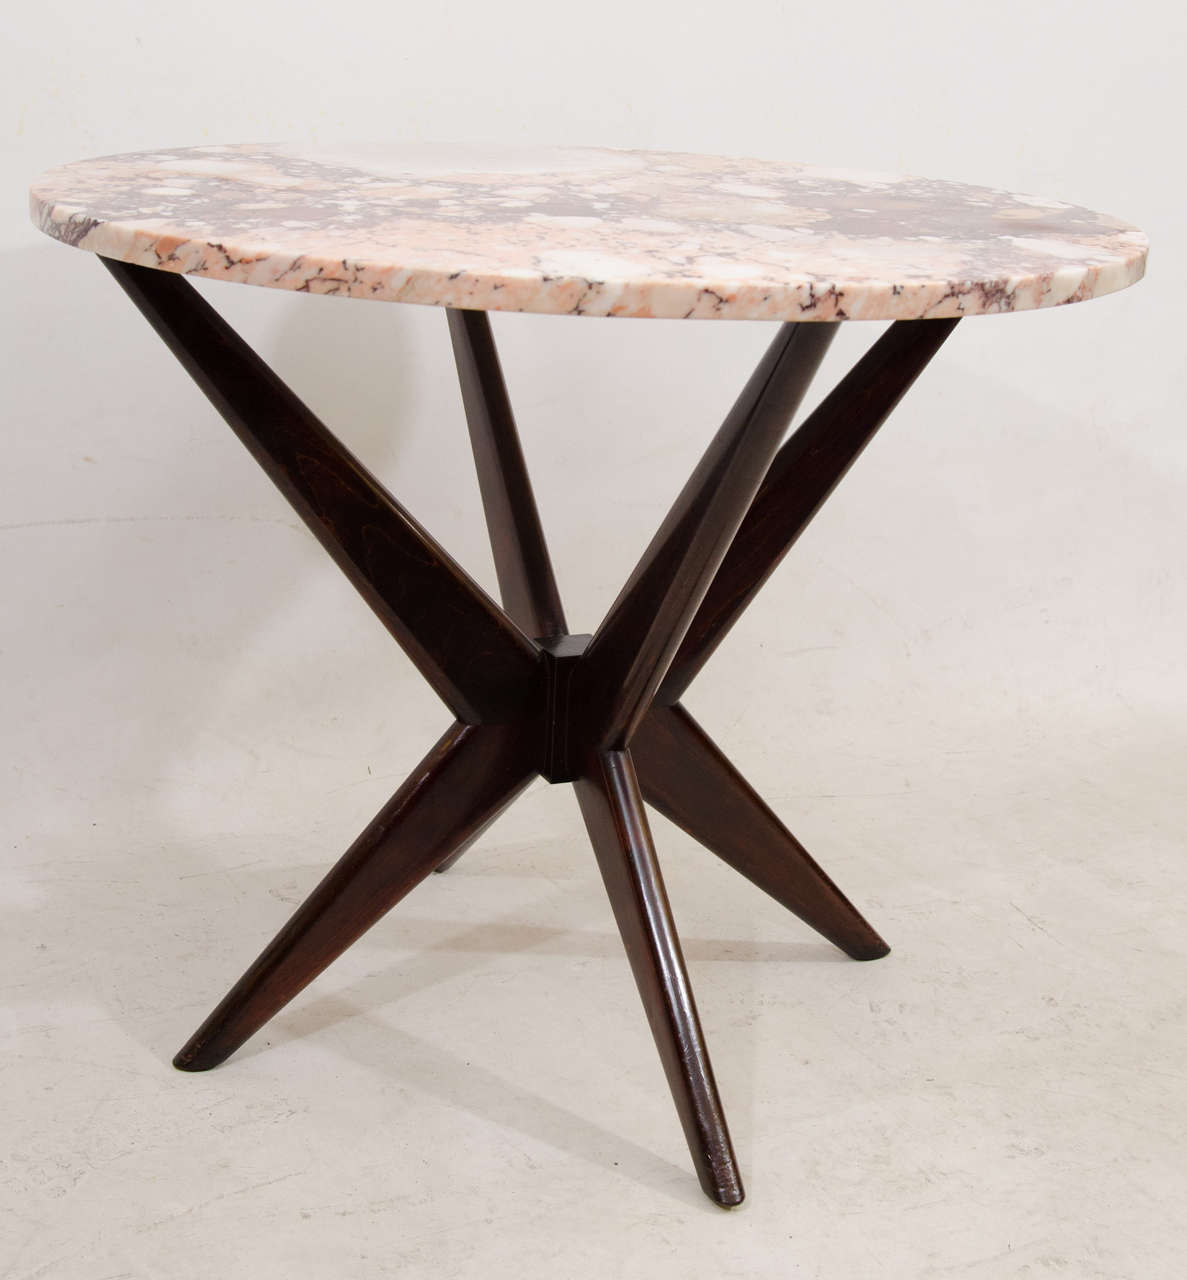 Handsome, small and versatile marble topped table. This piece can be used for a petite dining table or occasional table. Please contact for location. 